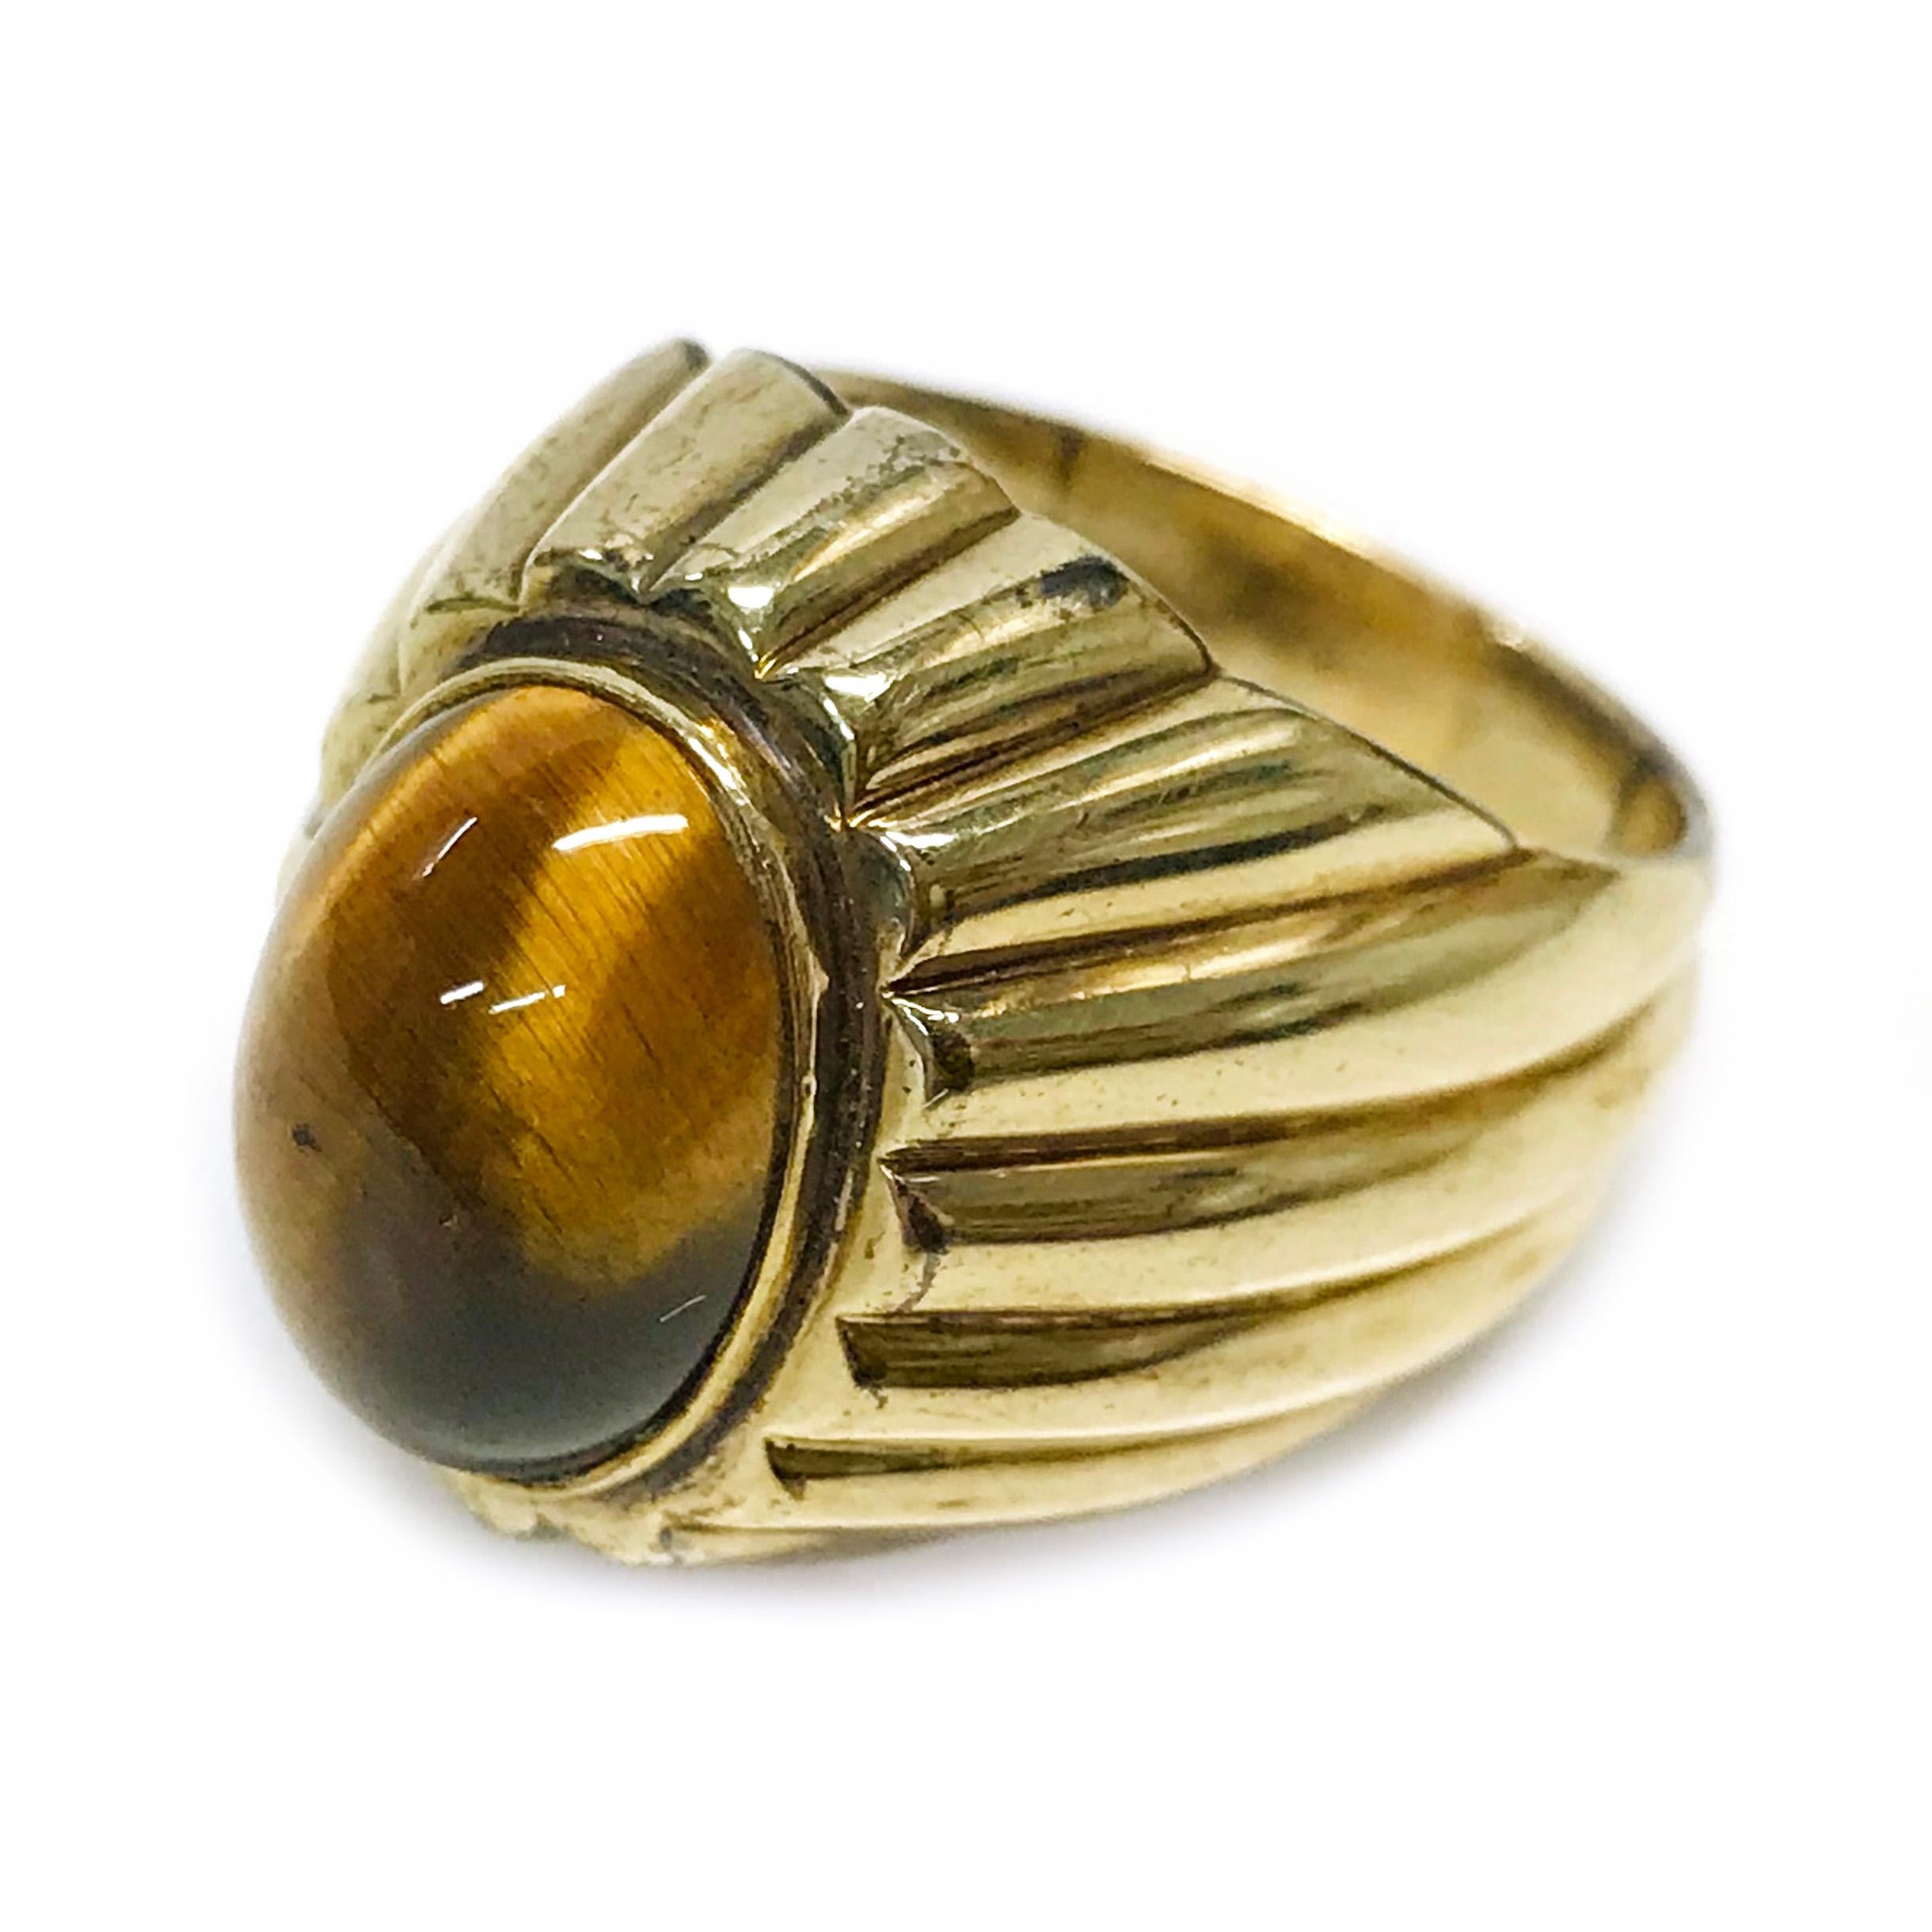 18 Karat Tiger's Eye Ring. The ring features a bezel-set oval Tiger's Eye Stone. The stone measures 14mm x 10mm and the ring size is 9. The entire ring has shiny curved domes around the tapered band. The total gold weight of the ring is 16 grams. 